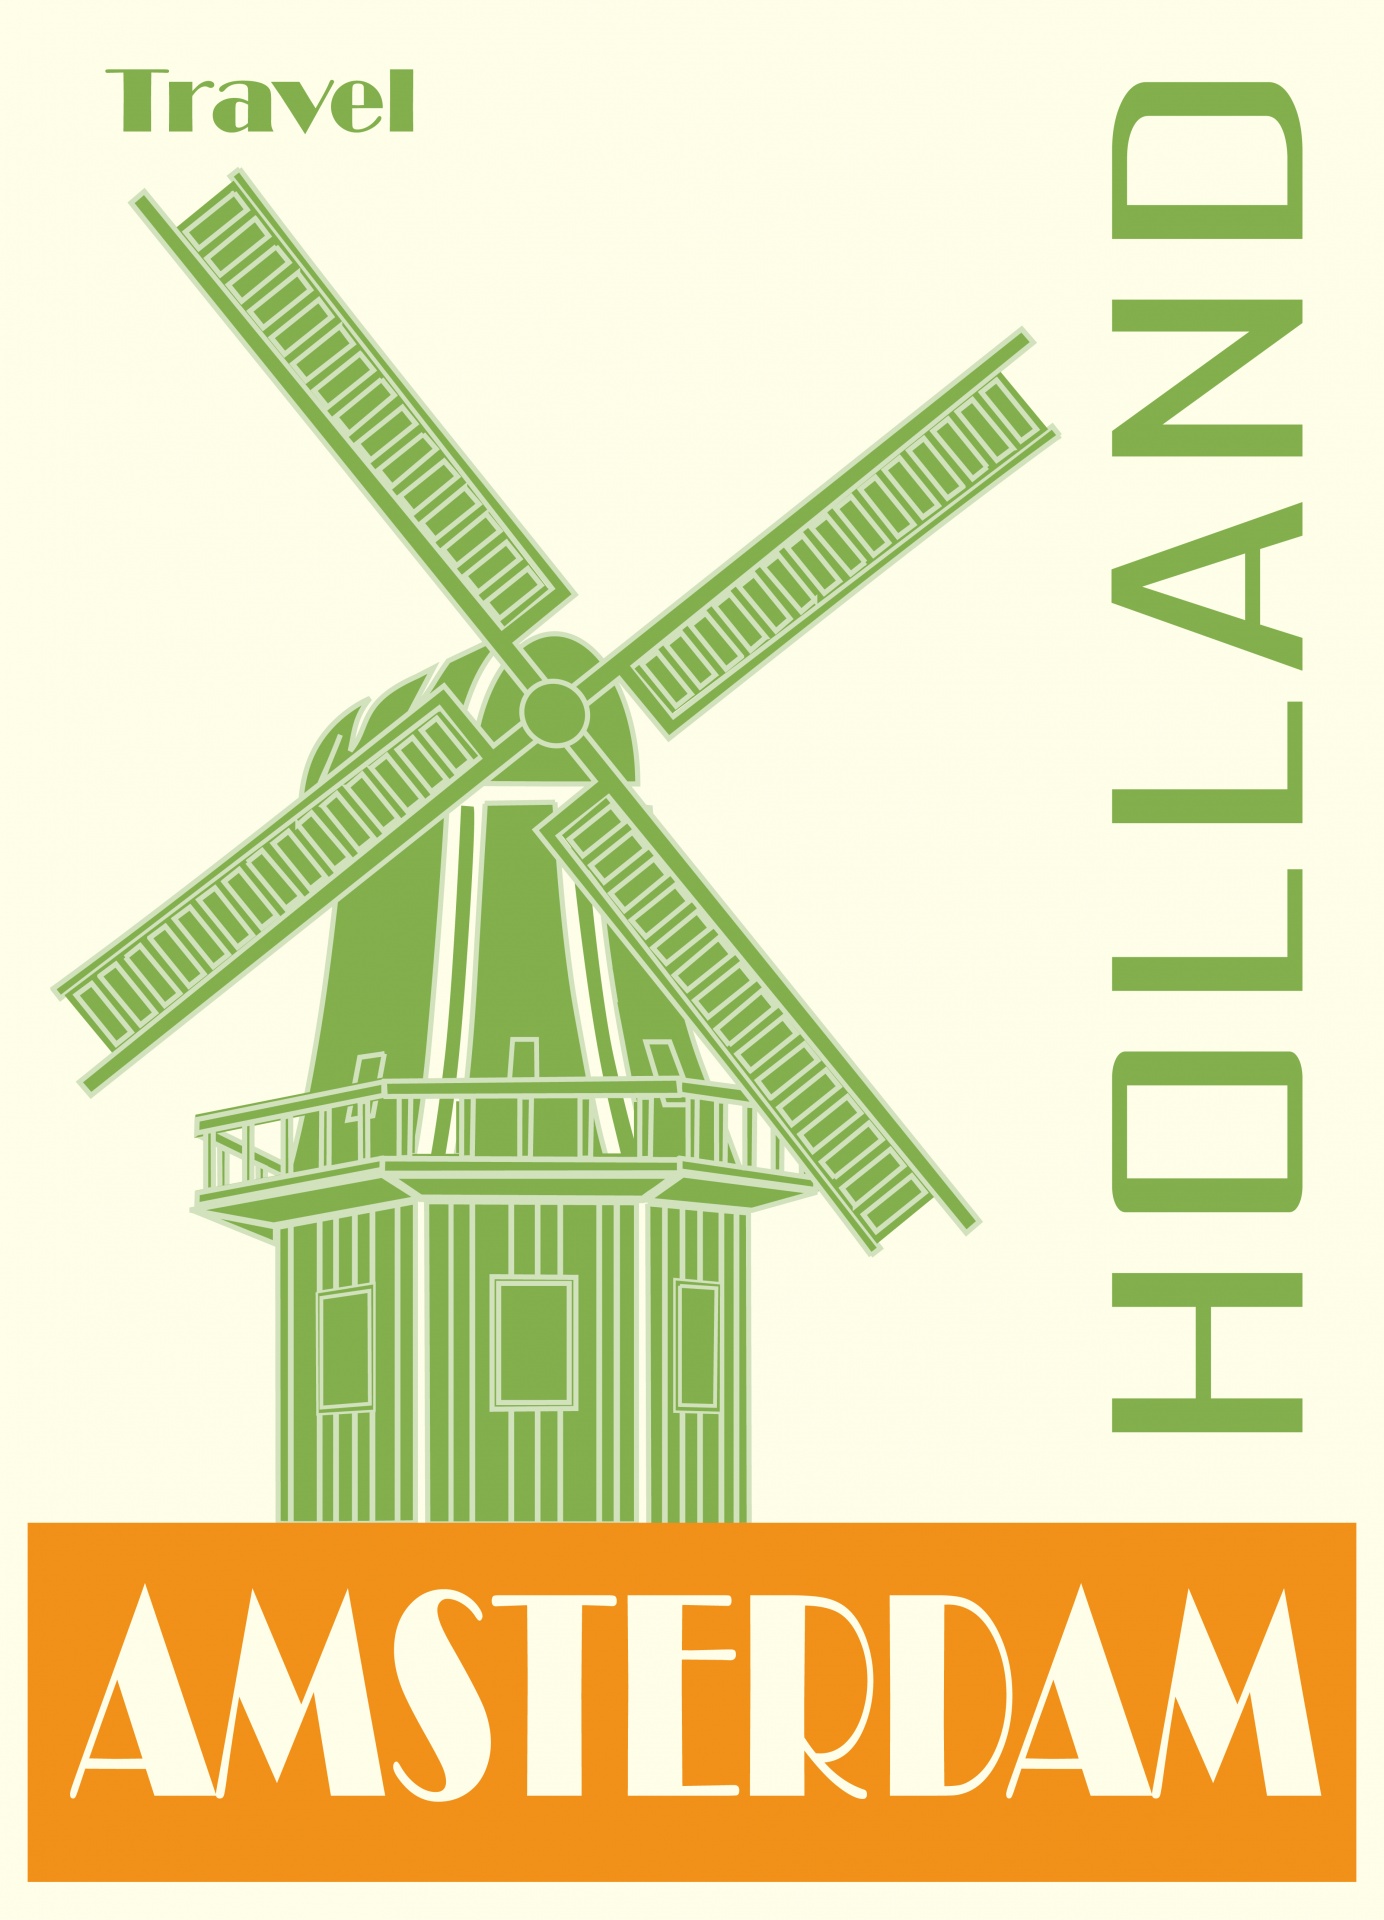 Retro, vintage style yet modern and fresh travel poster for Amsterdam, Holland